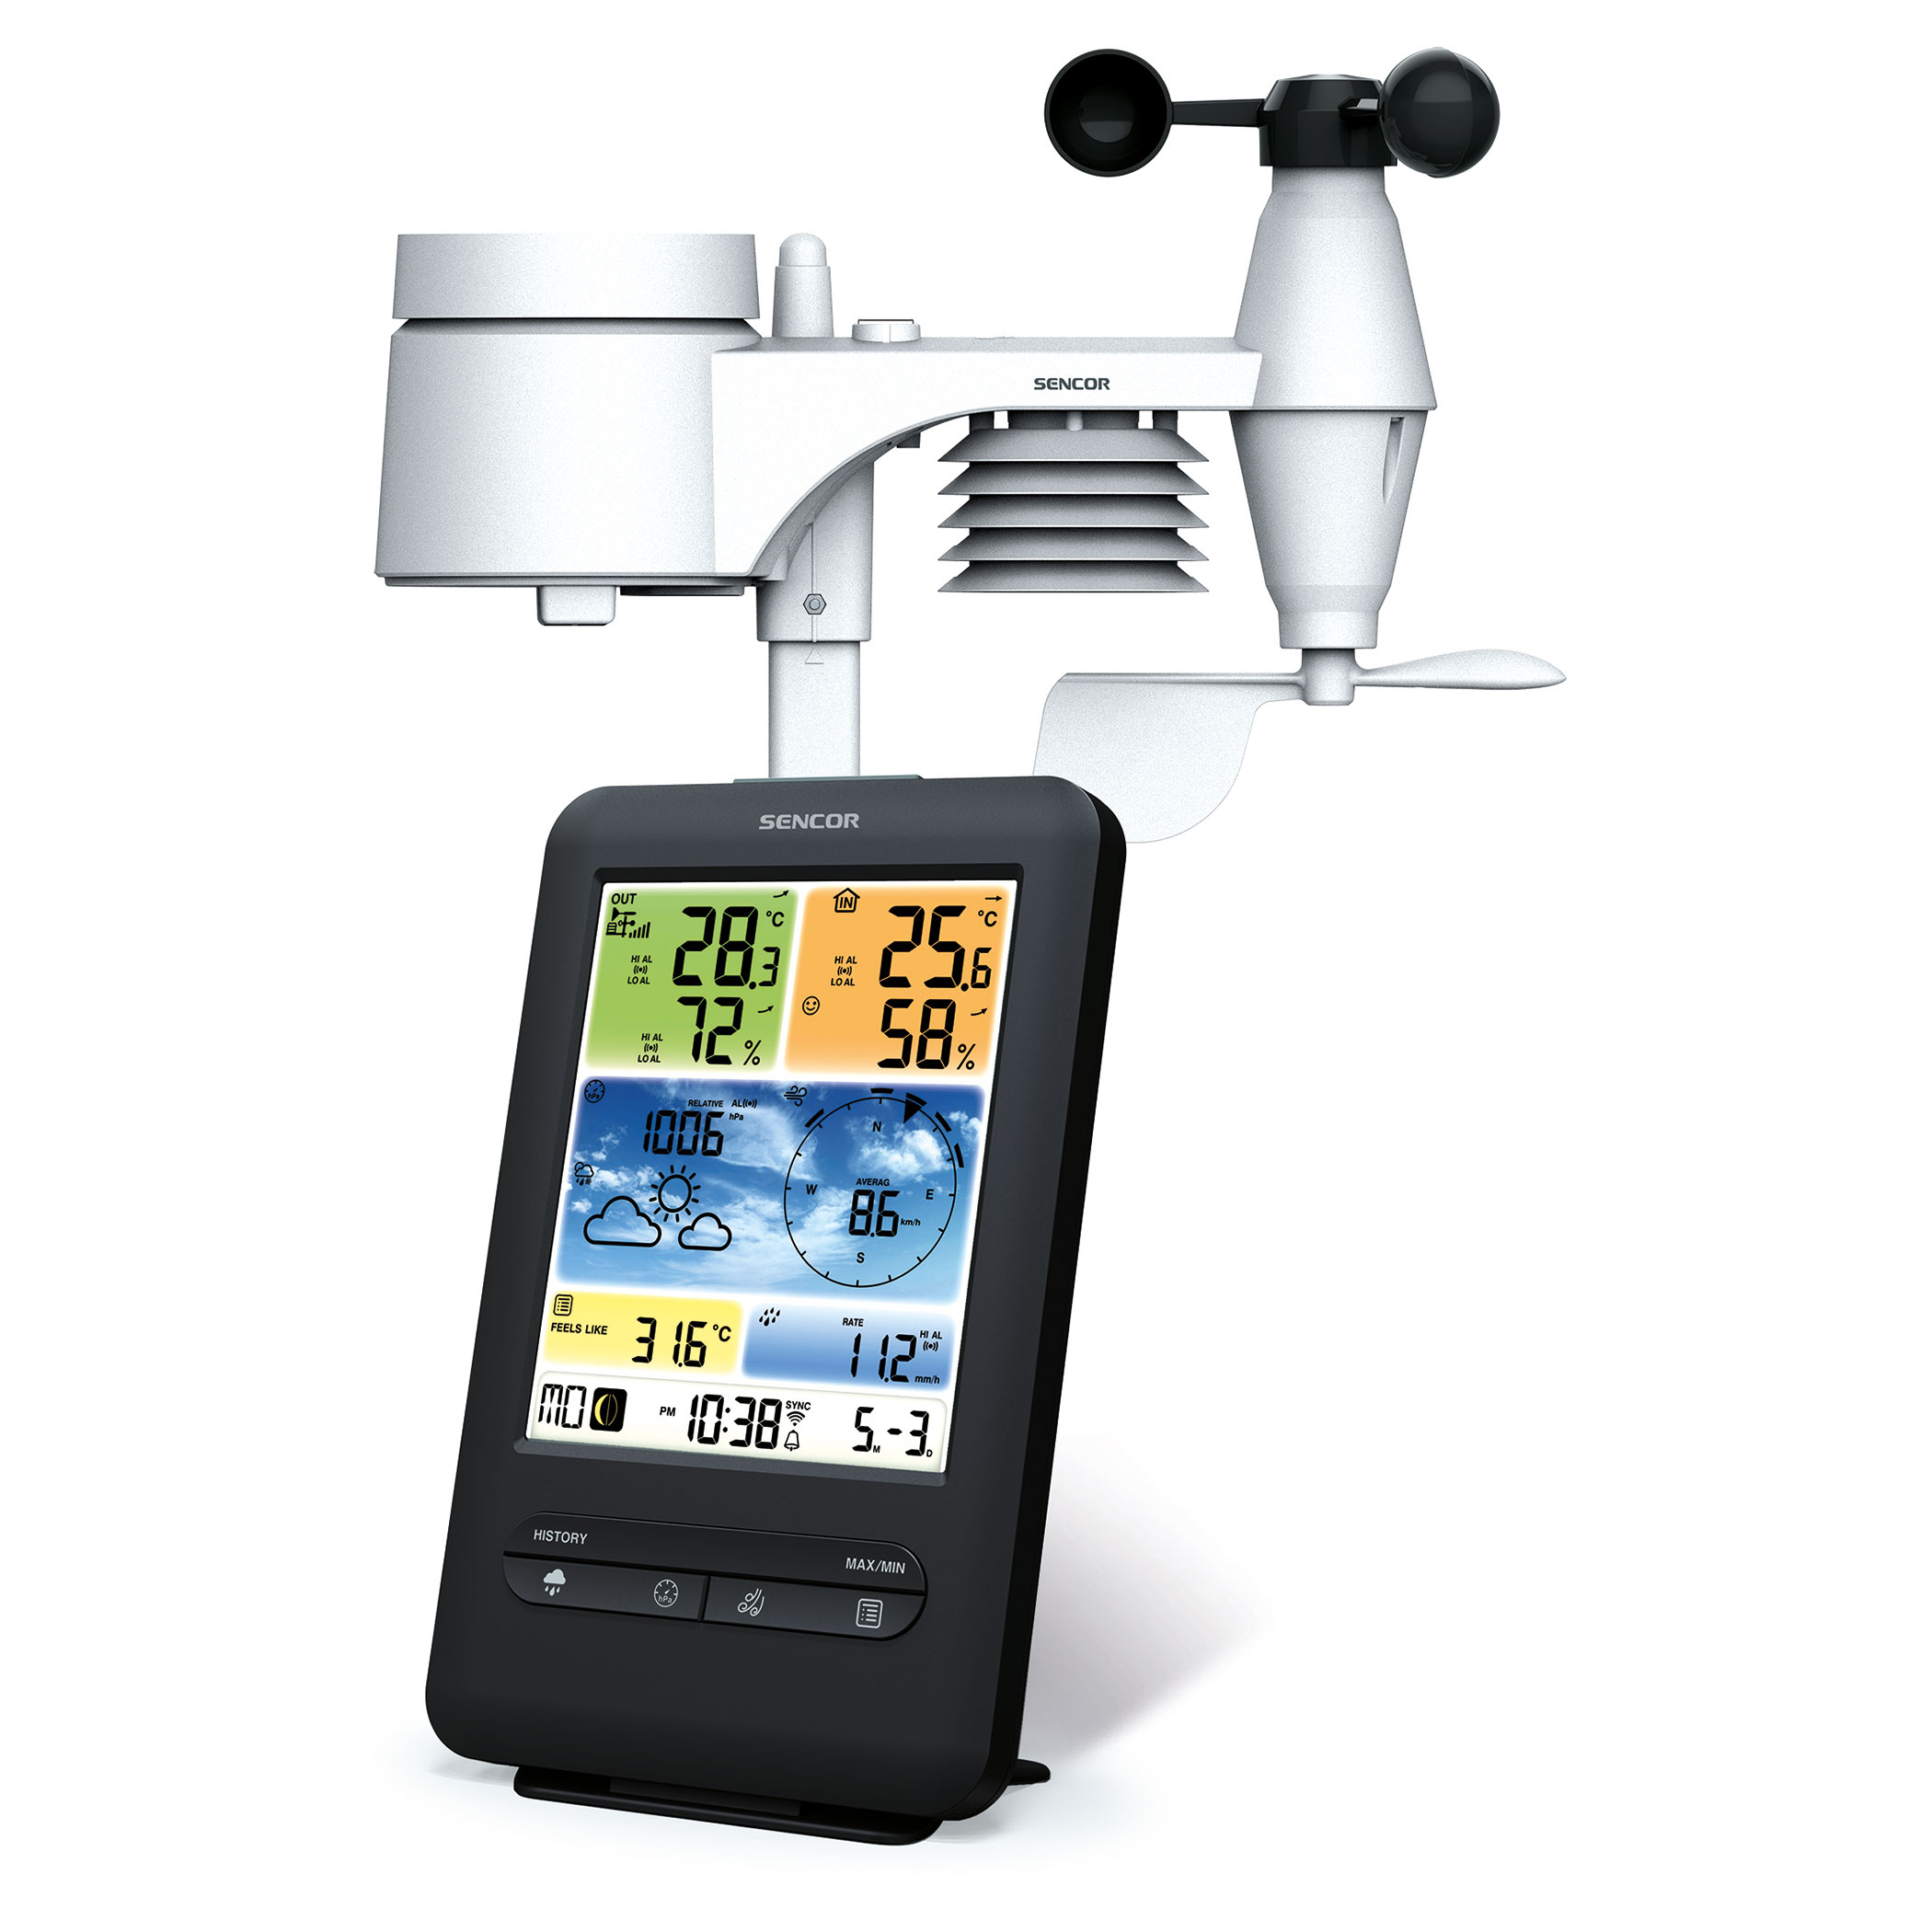 Mobile weather station